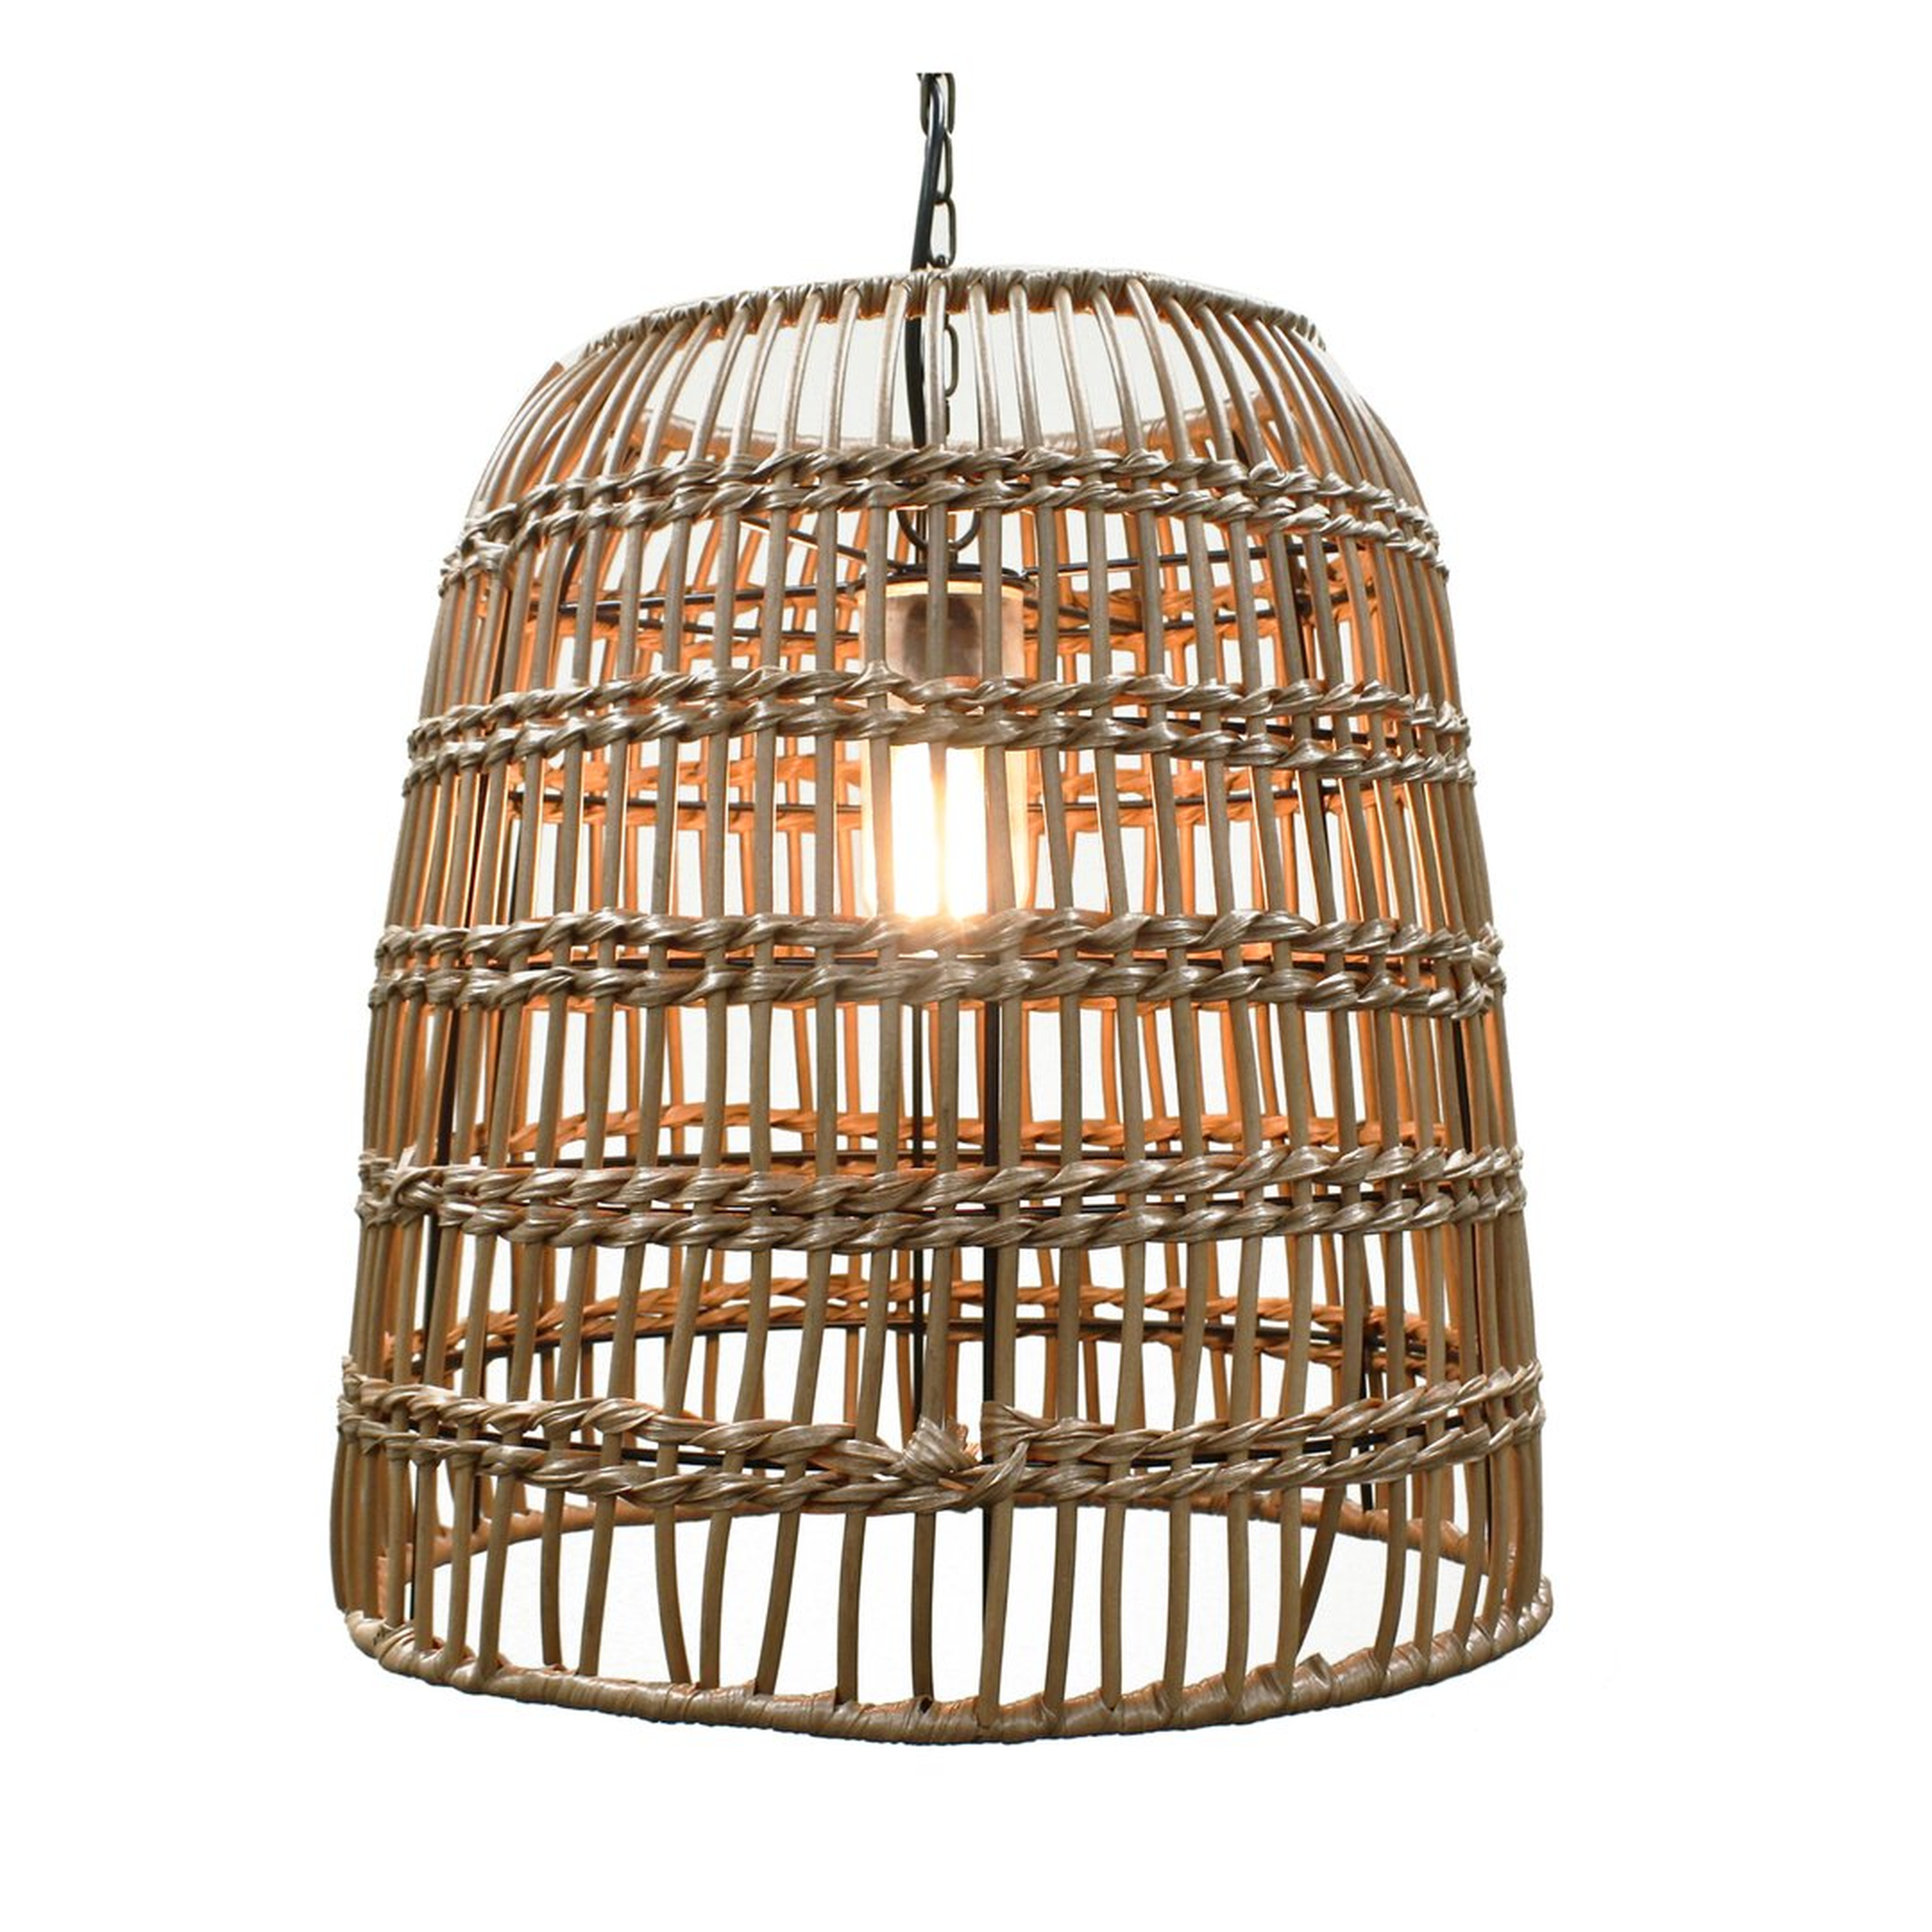 Inspired Visions Cayman Wicker 1 -Bulb 22"" H Plug-In Outdoor Pendant - Perigold